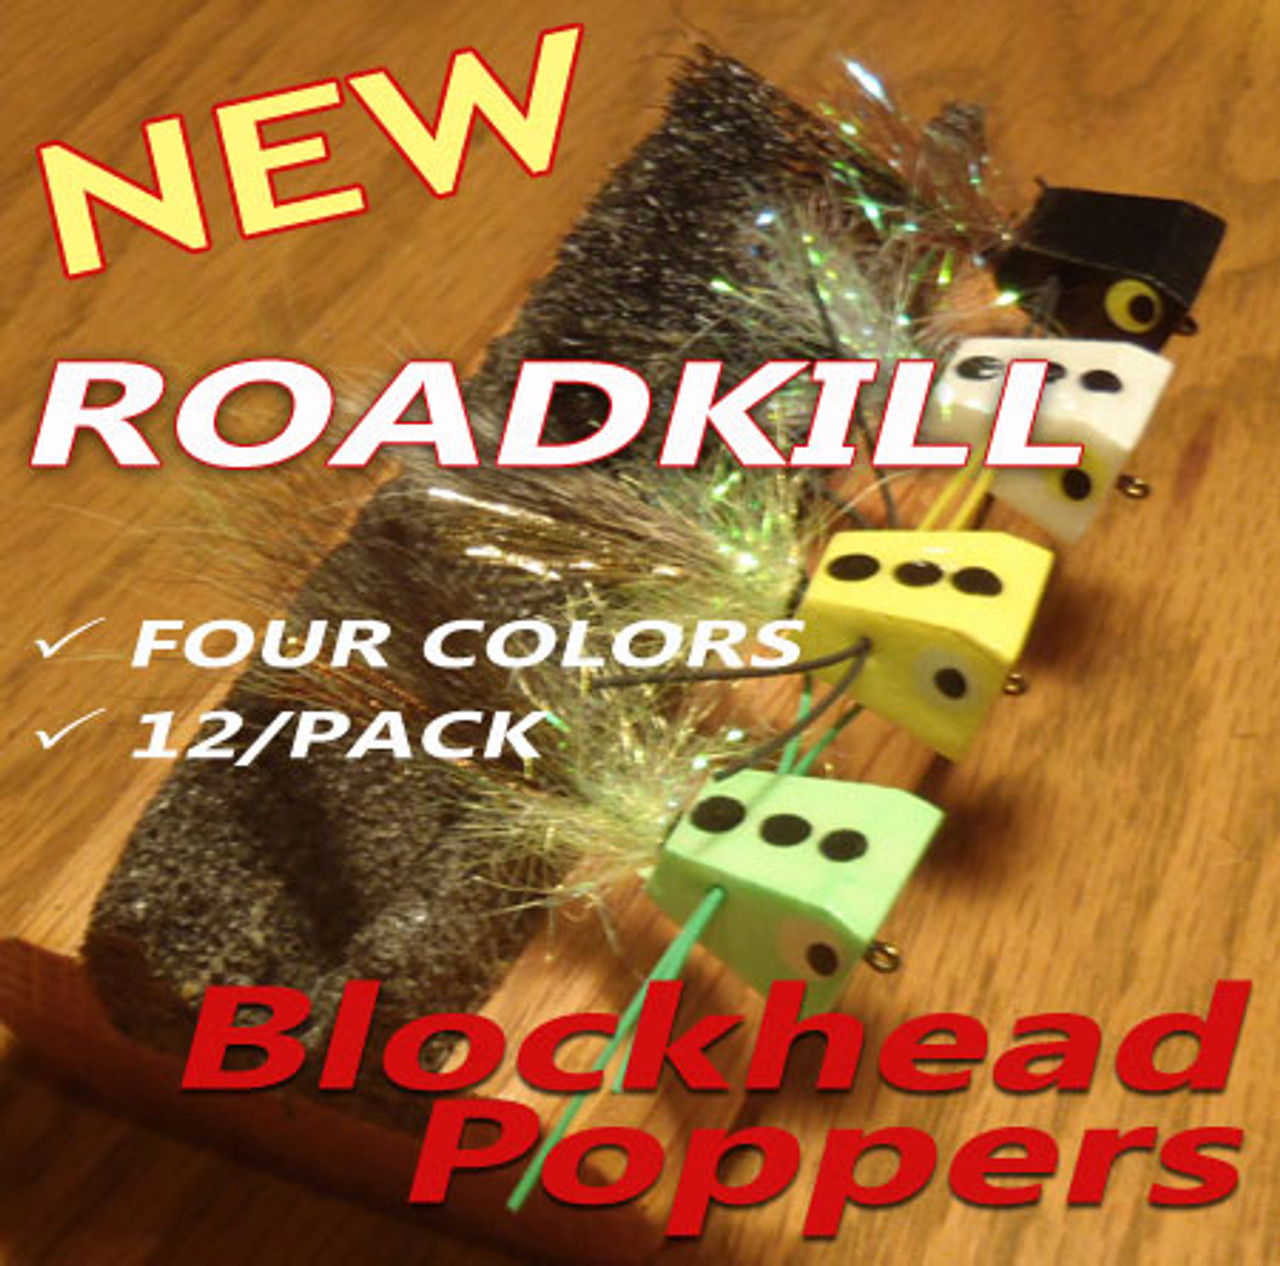 Roadkill Blockhead Poppers - 12/pack - 4 Colors - 3 Sizes